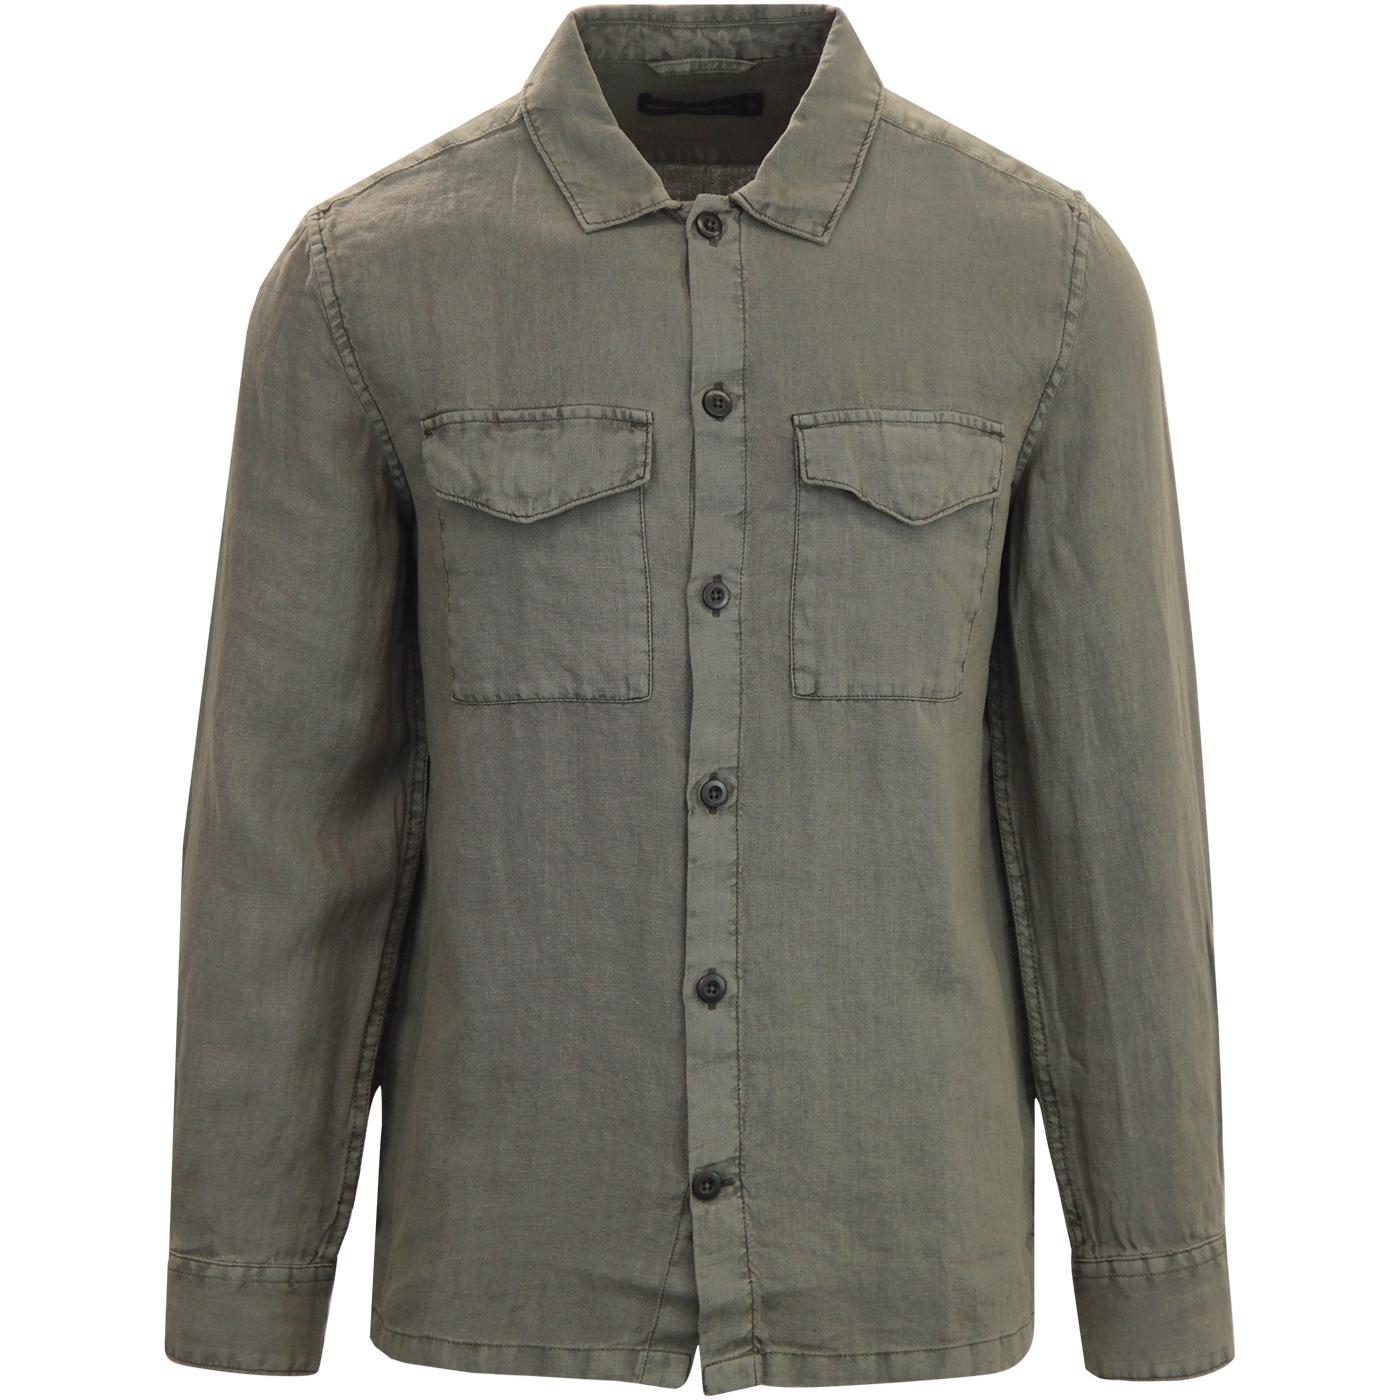 FRENCH CONNECTION Two Pocket Retro Indie Shirt in Dusty Olive